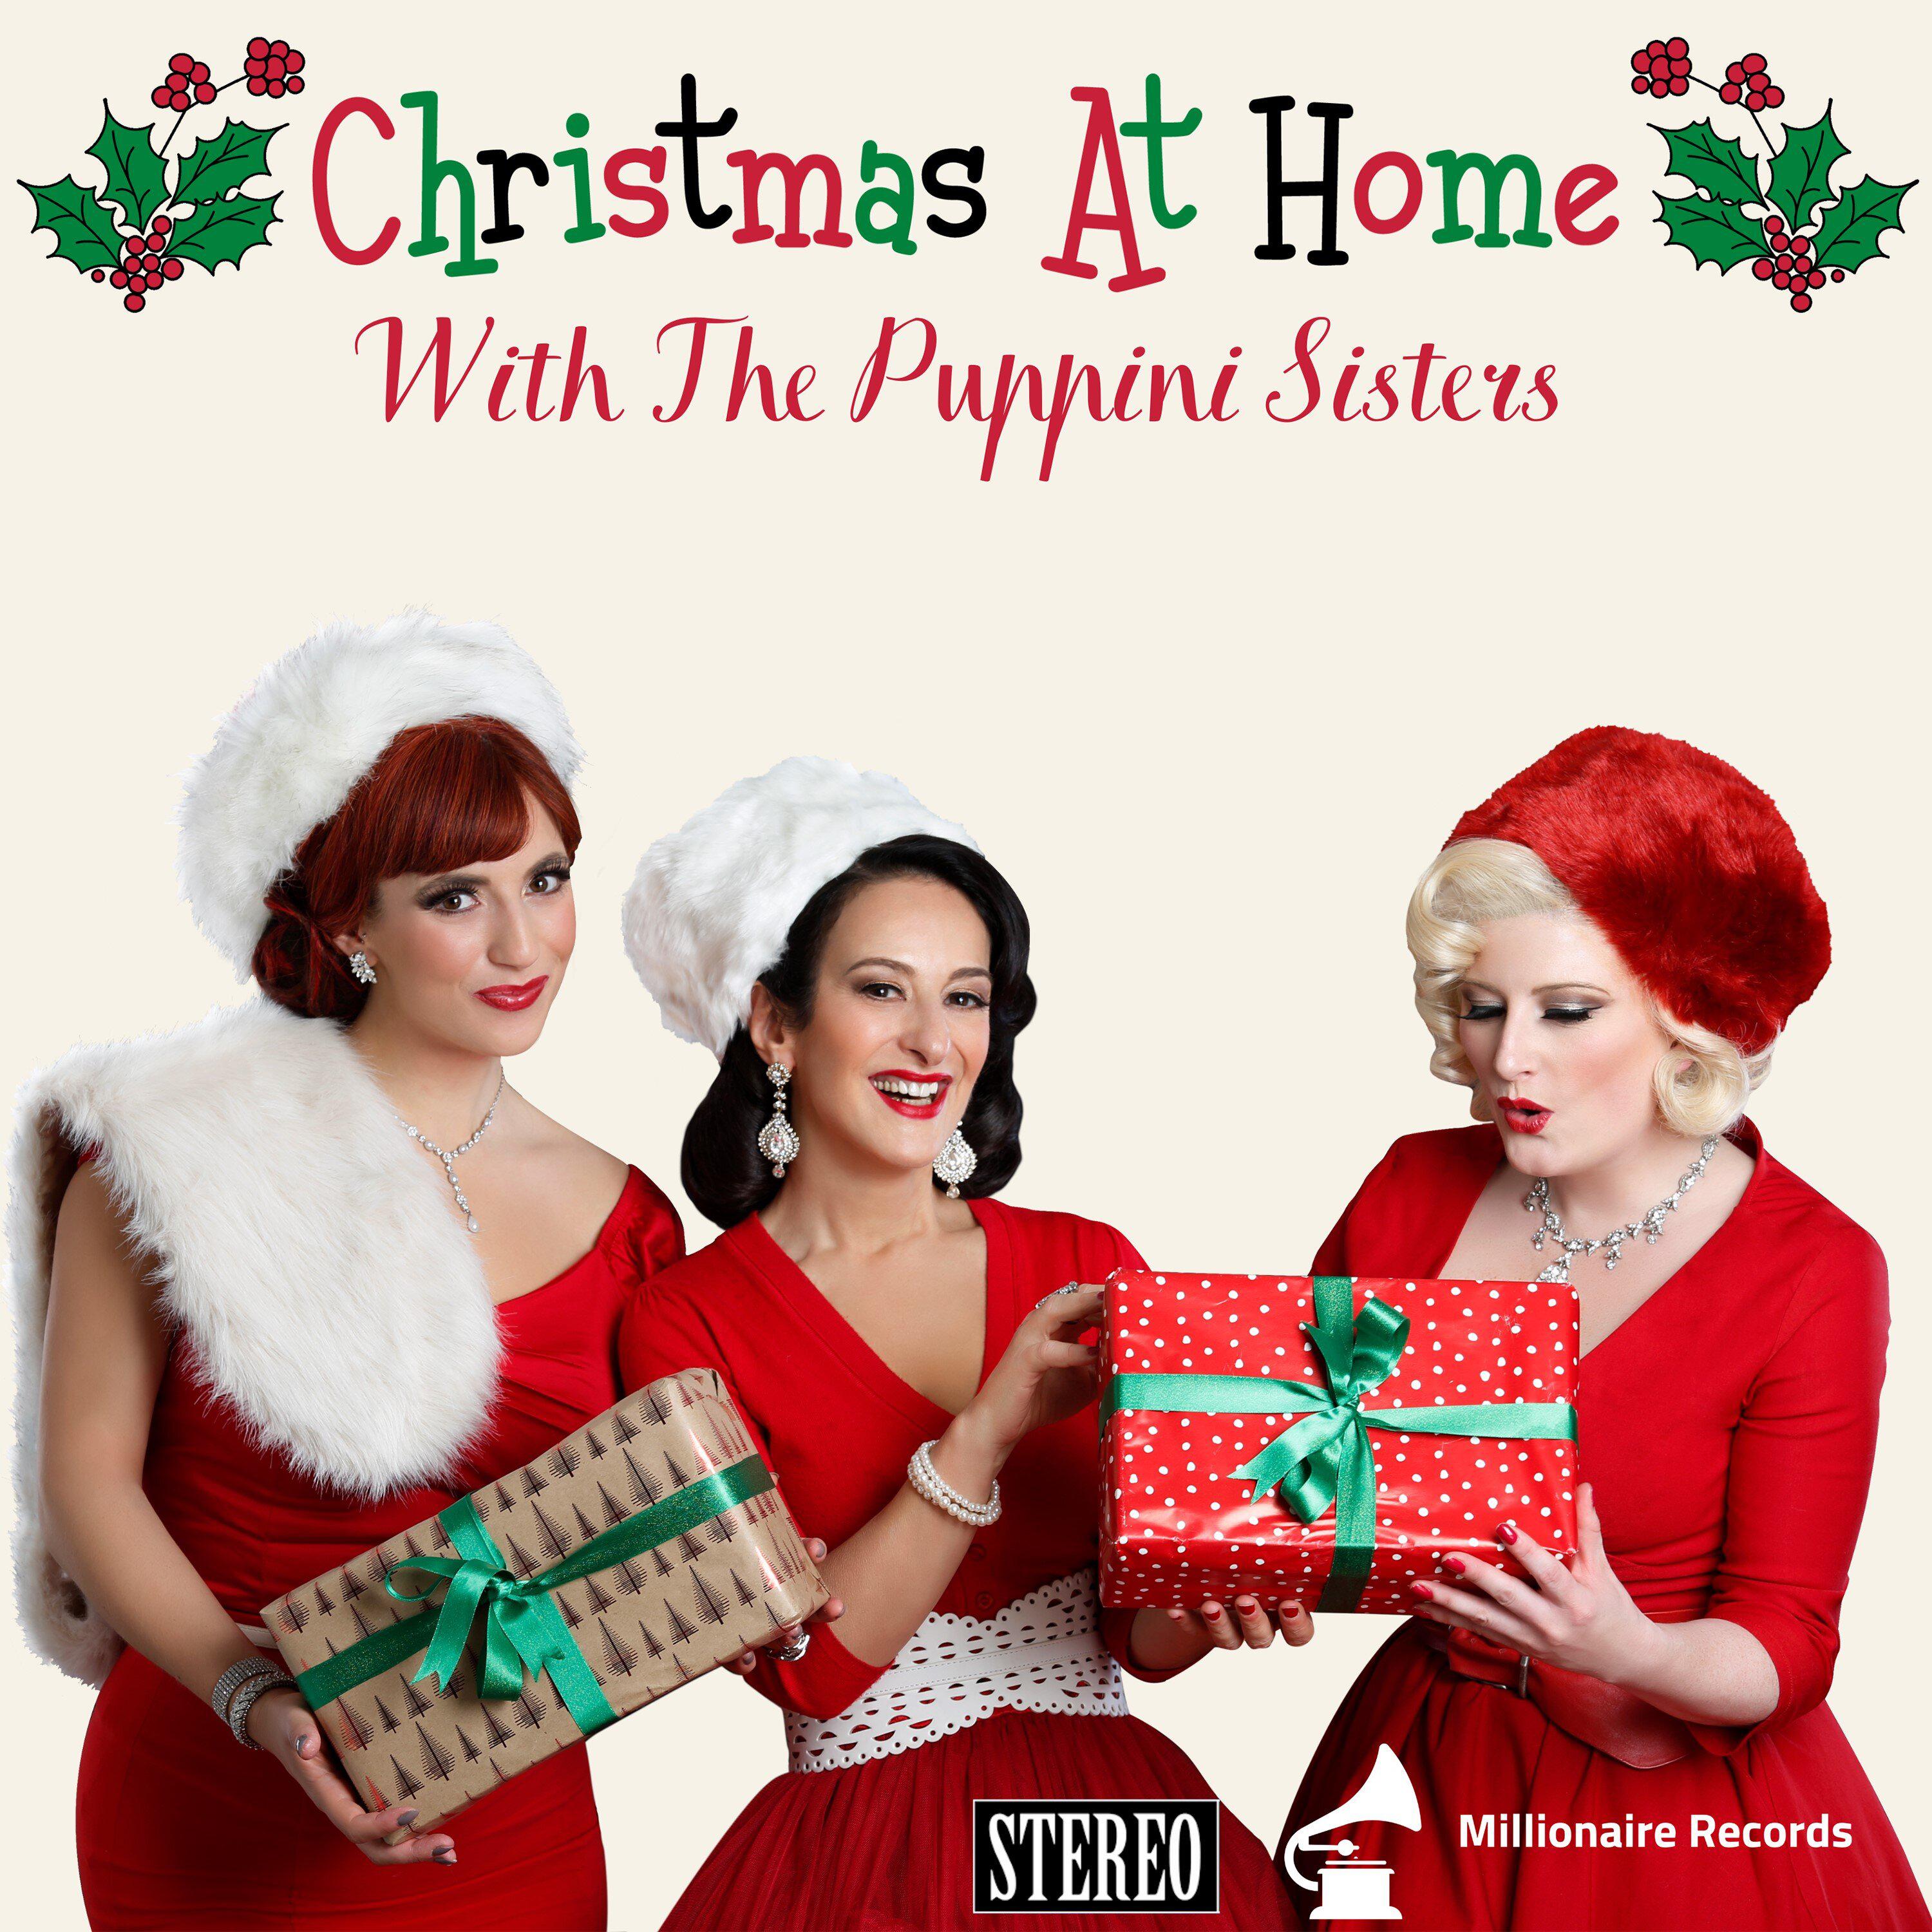 The Puppini Sisters - I Wanna Dance with Somebody